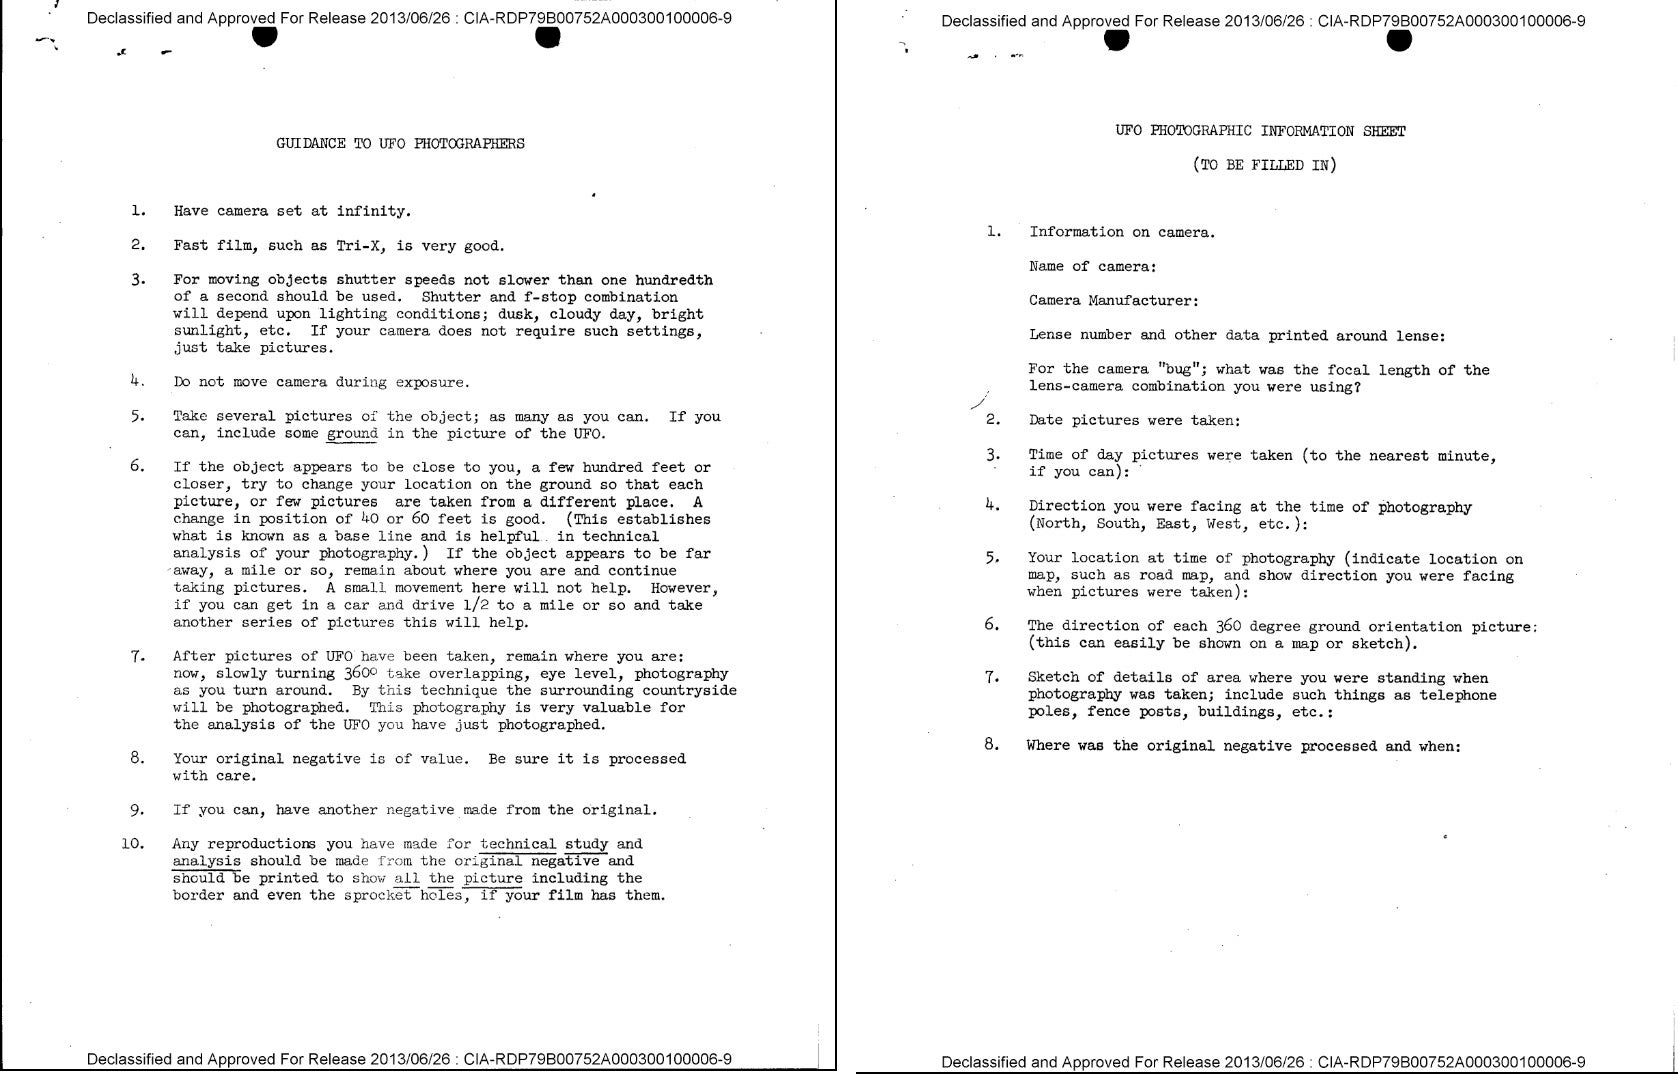 Real declassified CIA docs provide guidance for ‘UFO Photographers’